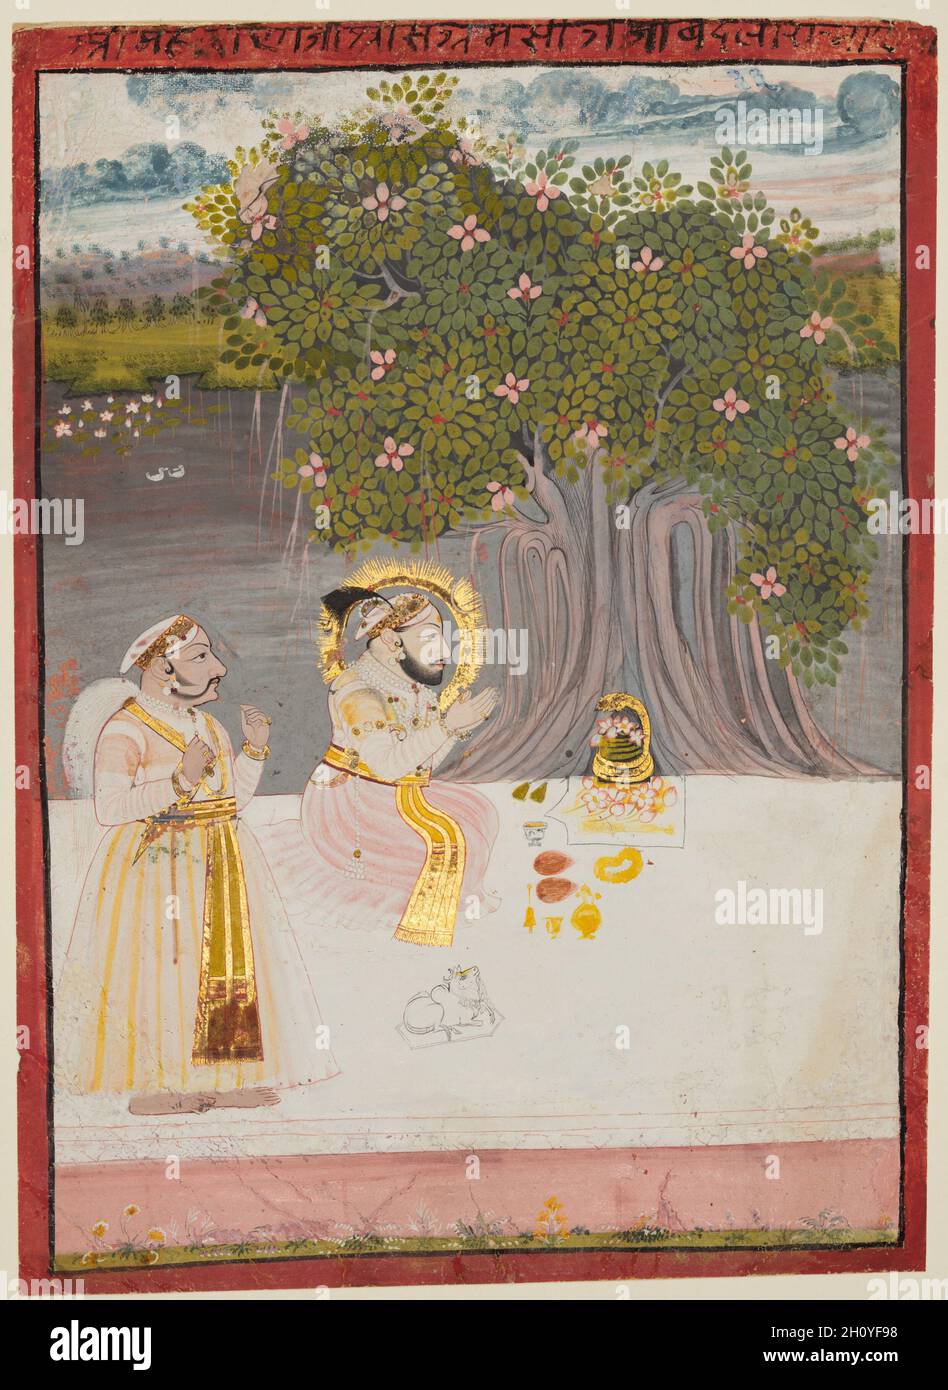 Maharana Sangram Singh II (r. 1710–34) Worshipping a Linga Under a Banyan Tree, c. 1712-15. Northwestern India, Rajasthan, Rajput Kingdom of Mewar. Opaque watercolor, ink, and gold on paper; page: 24.8 x 18.1 cm (9 3/4 x 7 1/8 in.); miniature: 23.2 x 16.8 cm (9 1/8 x 6 5/8 in.).  The king kneels in worship at an ancient tree shrine on the banks of a lake. Such shrines were often associated with serpent deities, and a four-headed snake painted in gold is wrapped around the linga, the phallic emblem marking the sacred presence of the god Shiva. Flowers, packets of paan (areca nut and sweetmeats Stock Photo